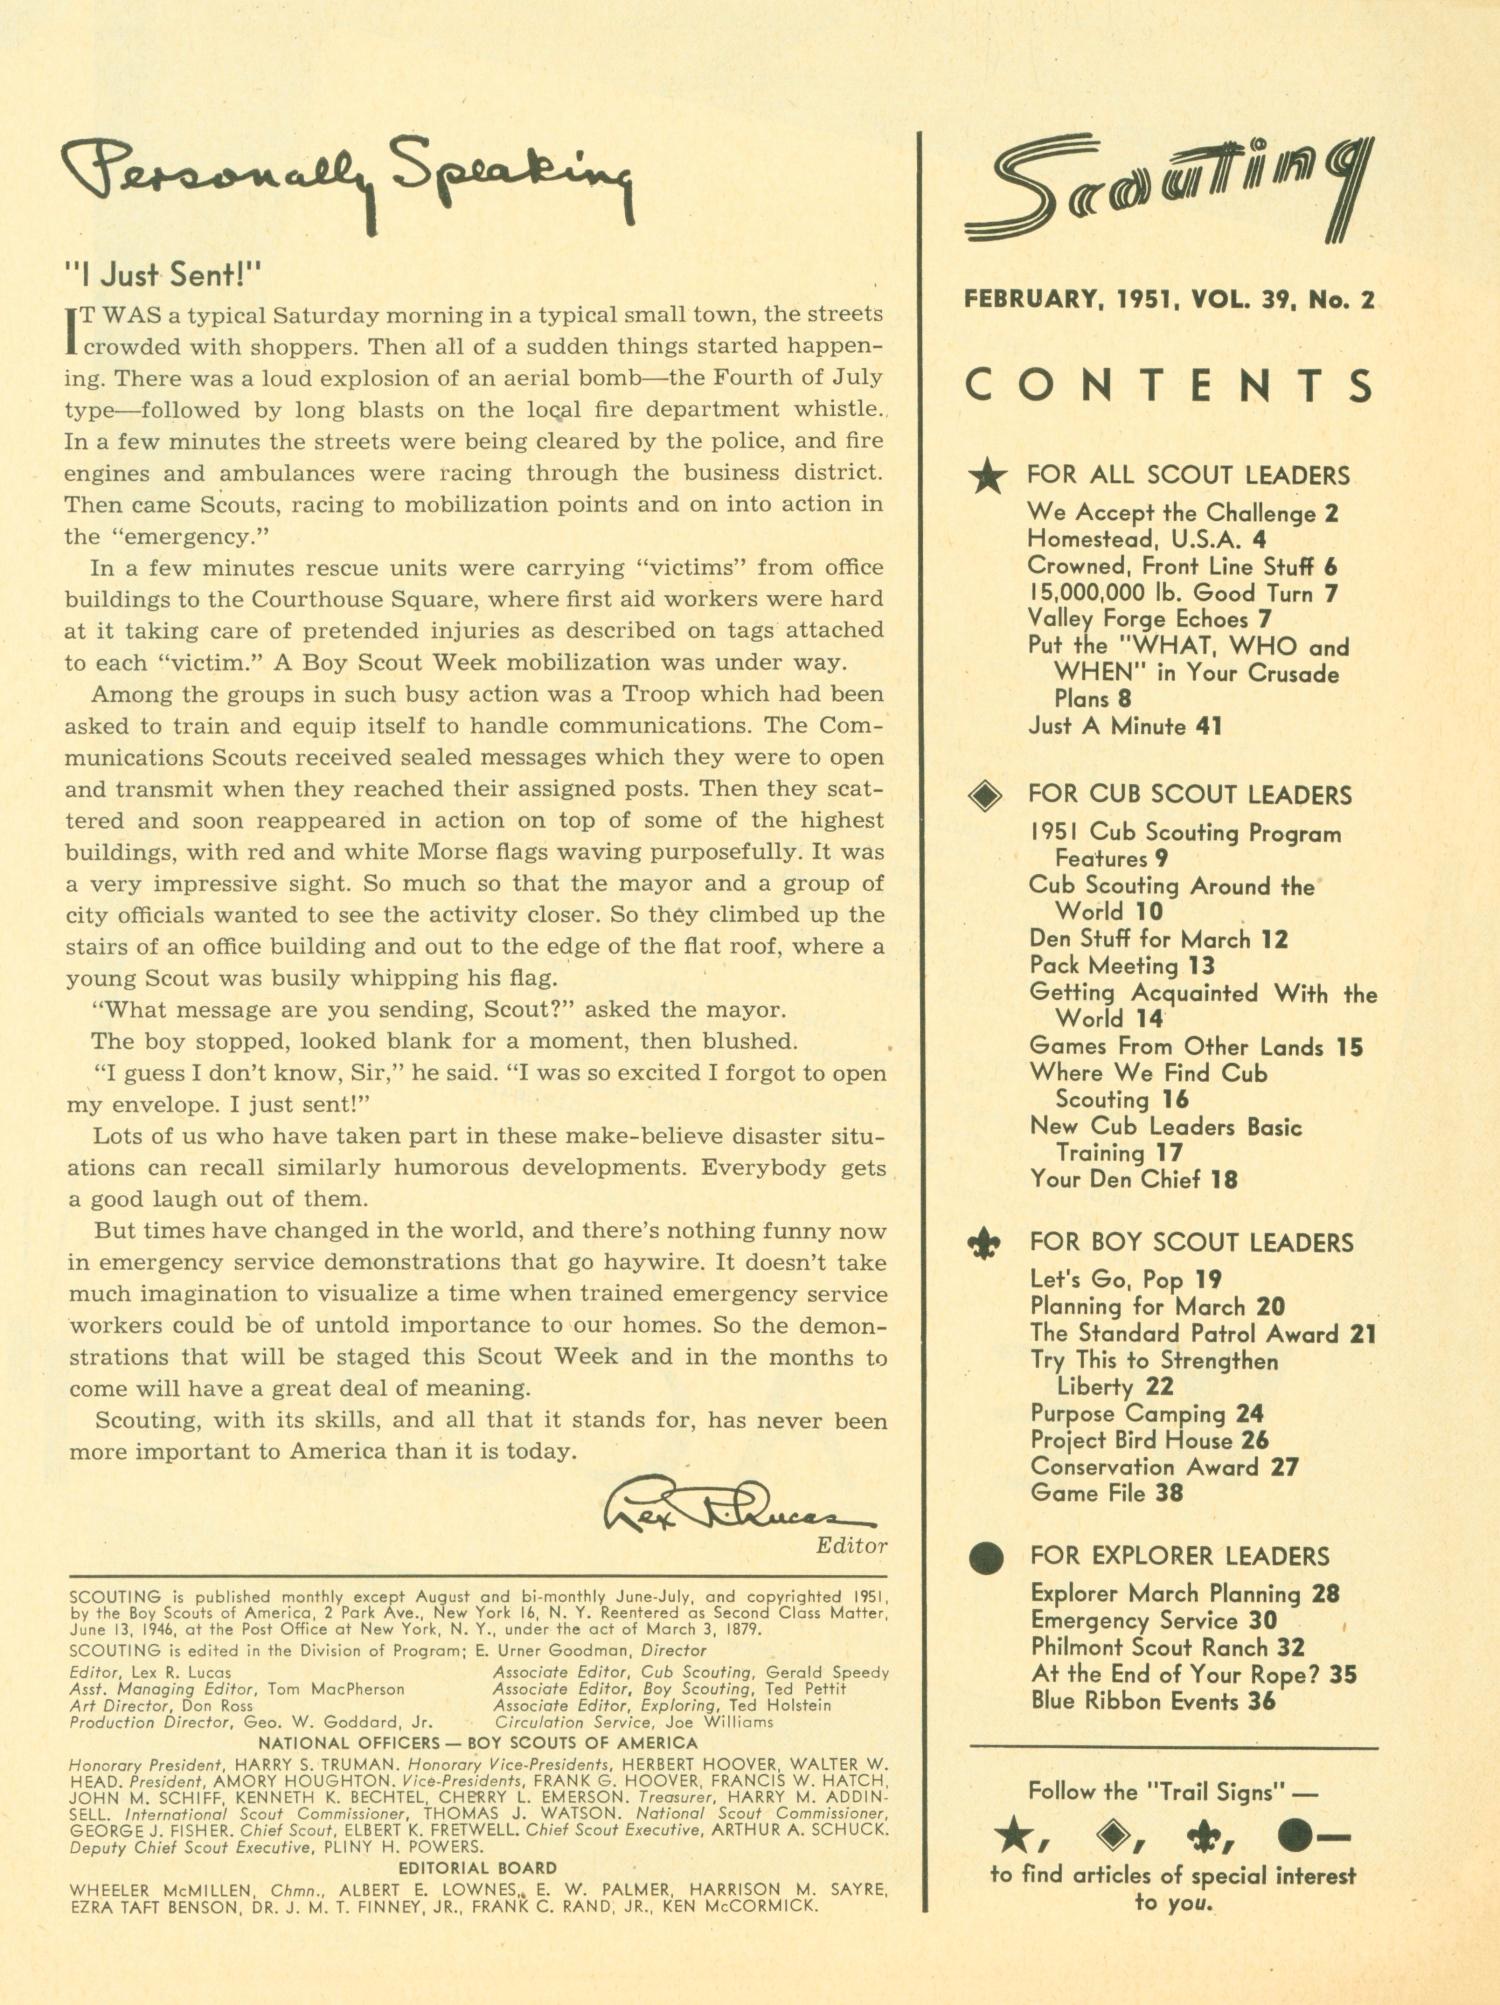 Scouting, Volume 39, Number 2, February 1951
                                                
                                                    1
                                                